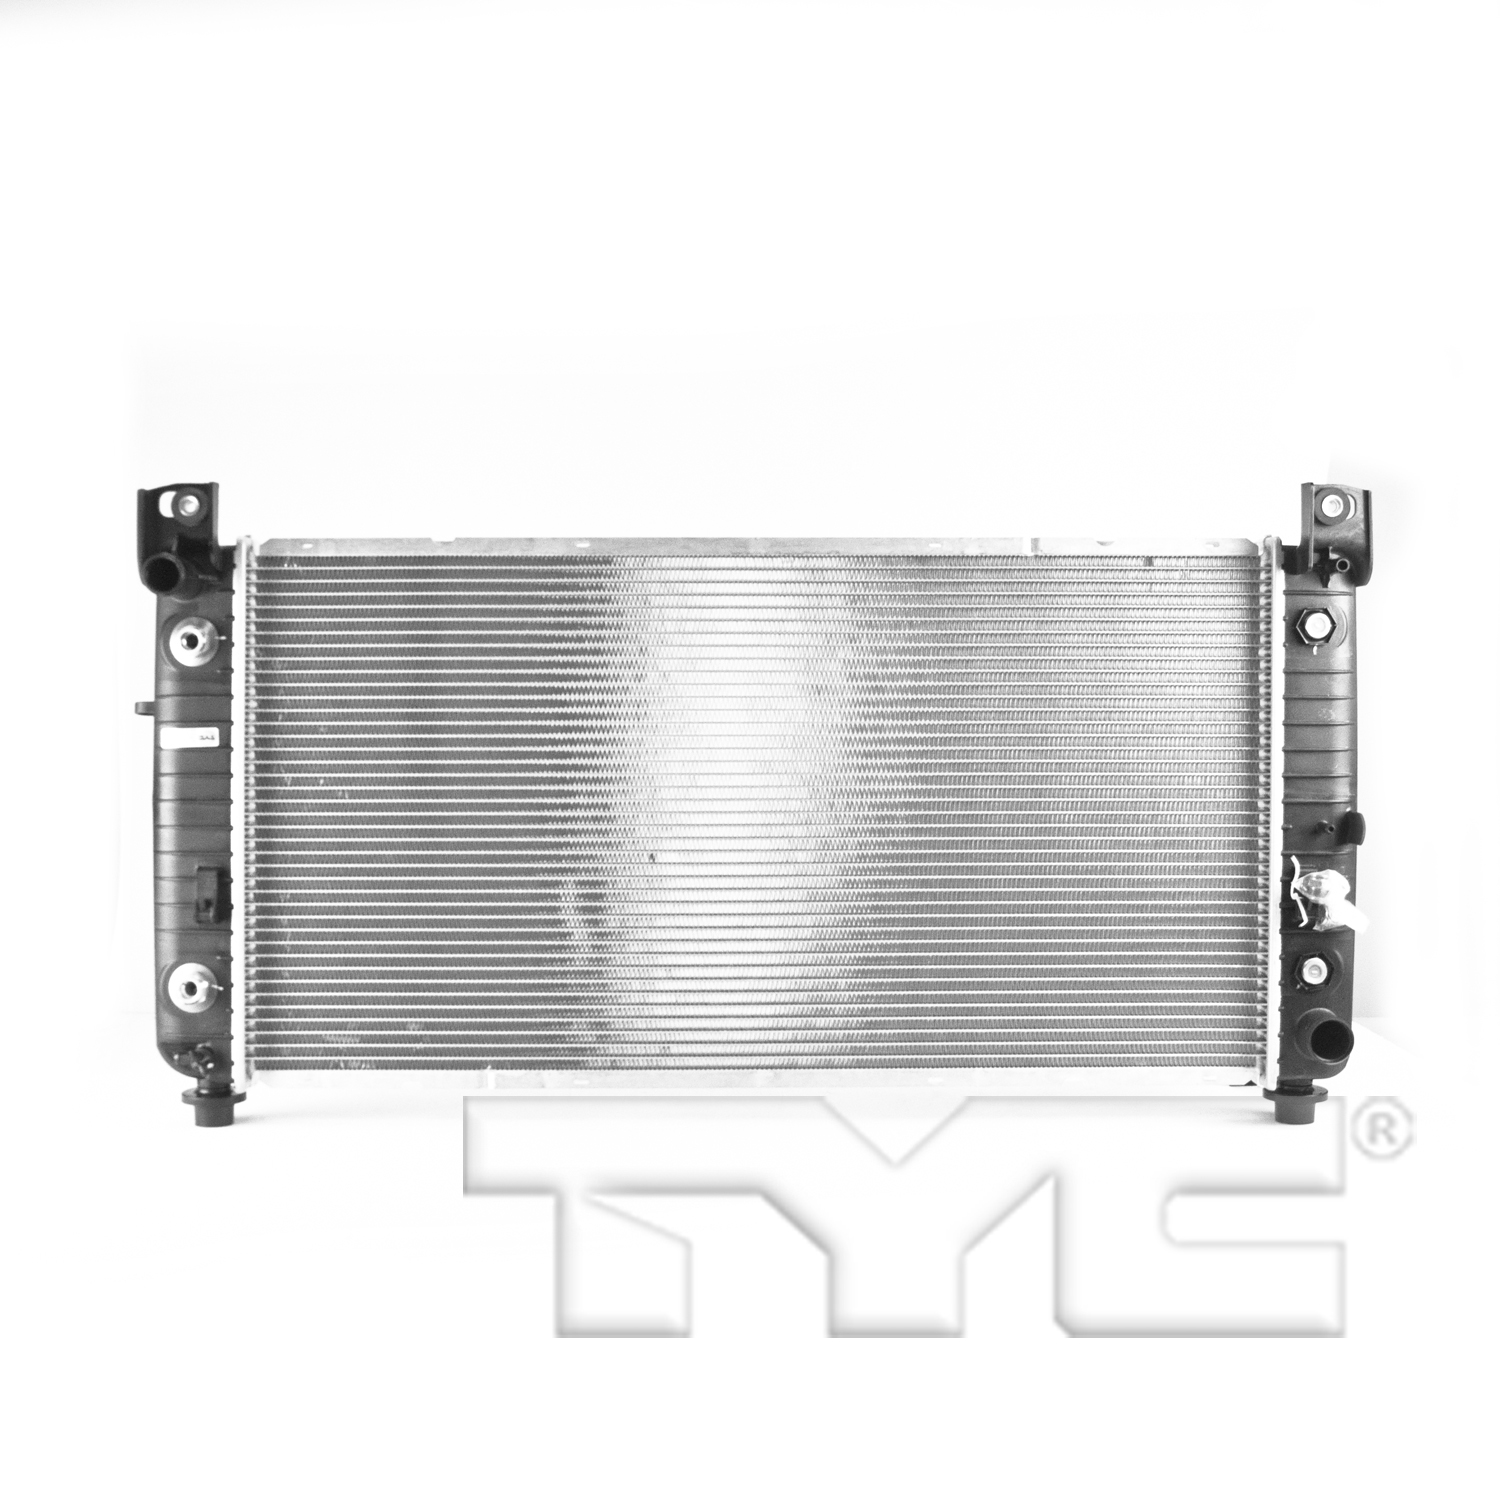 Aftermarket RADIATORS for CADILLAC - ESCALADE EXT, ESCALADE EXTENSION,02-06,Radiator assembly